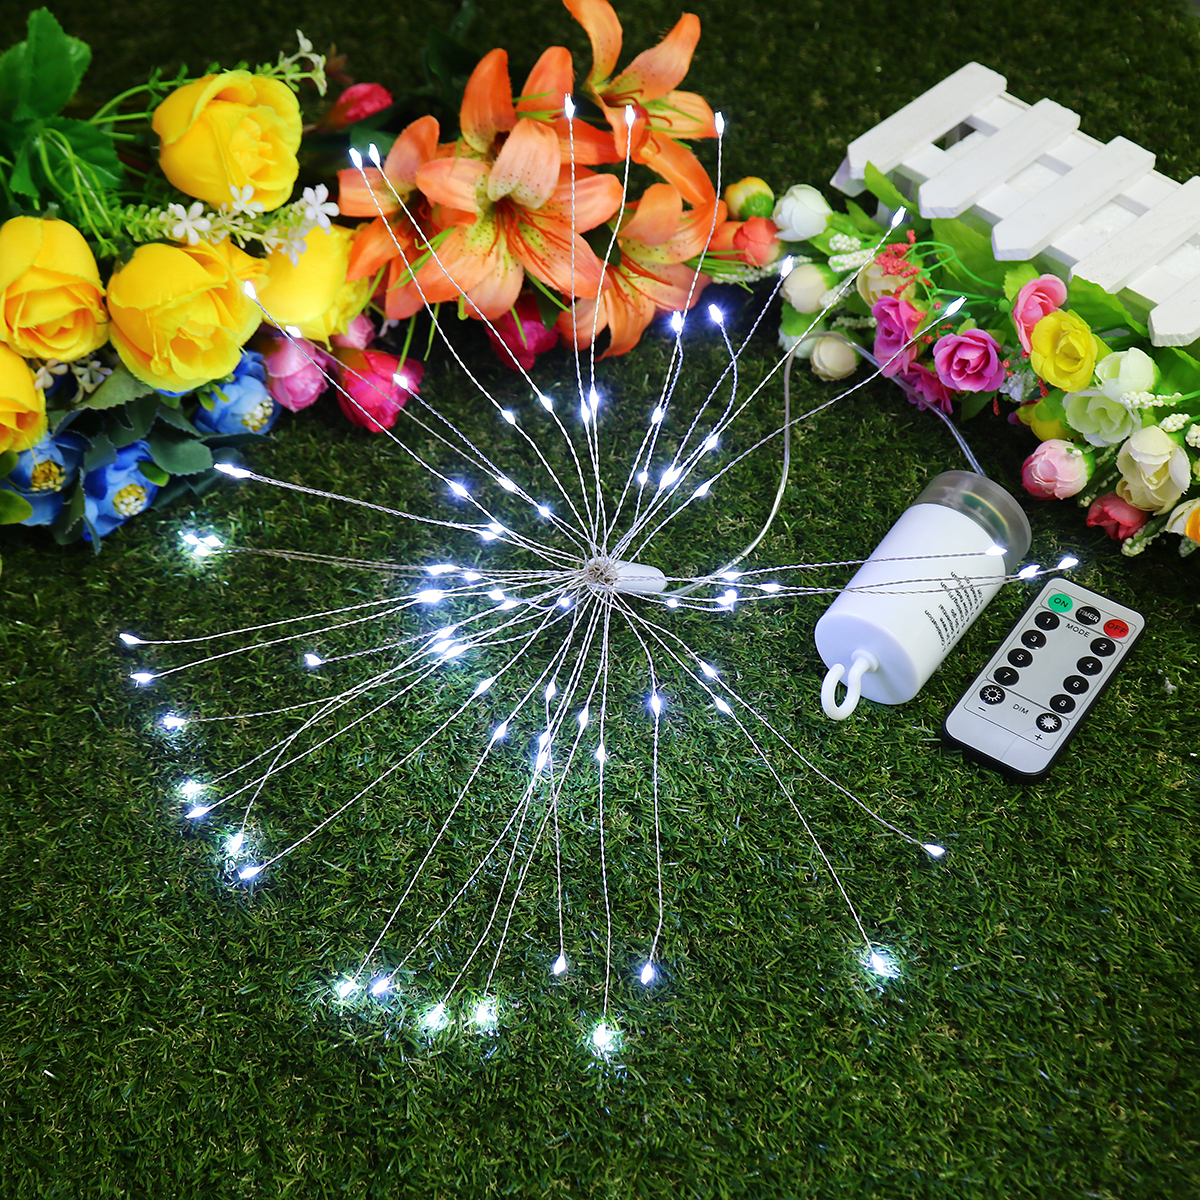 Hanging LED Firework Fairy String Light 8Modes Remote Home Party Wedding Decor